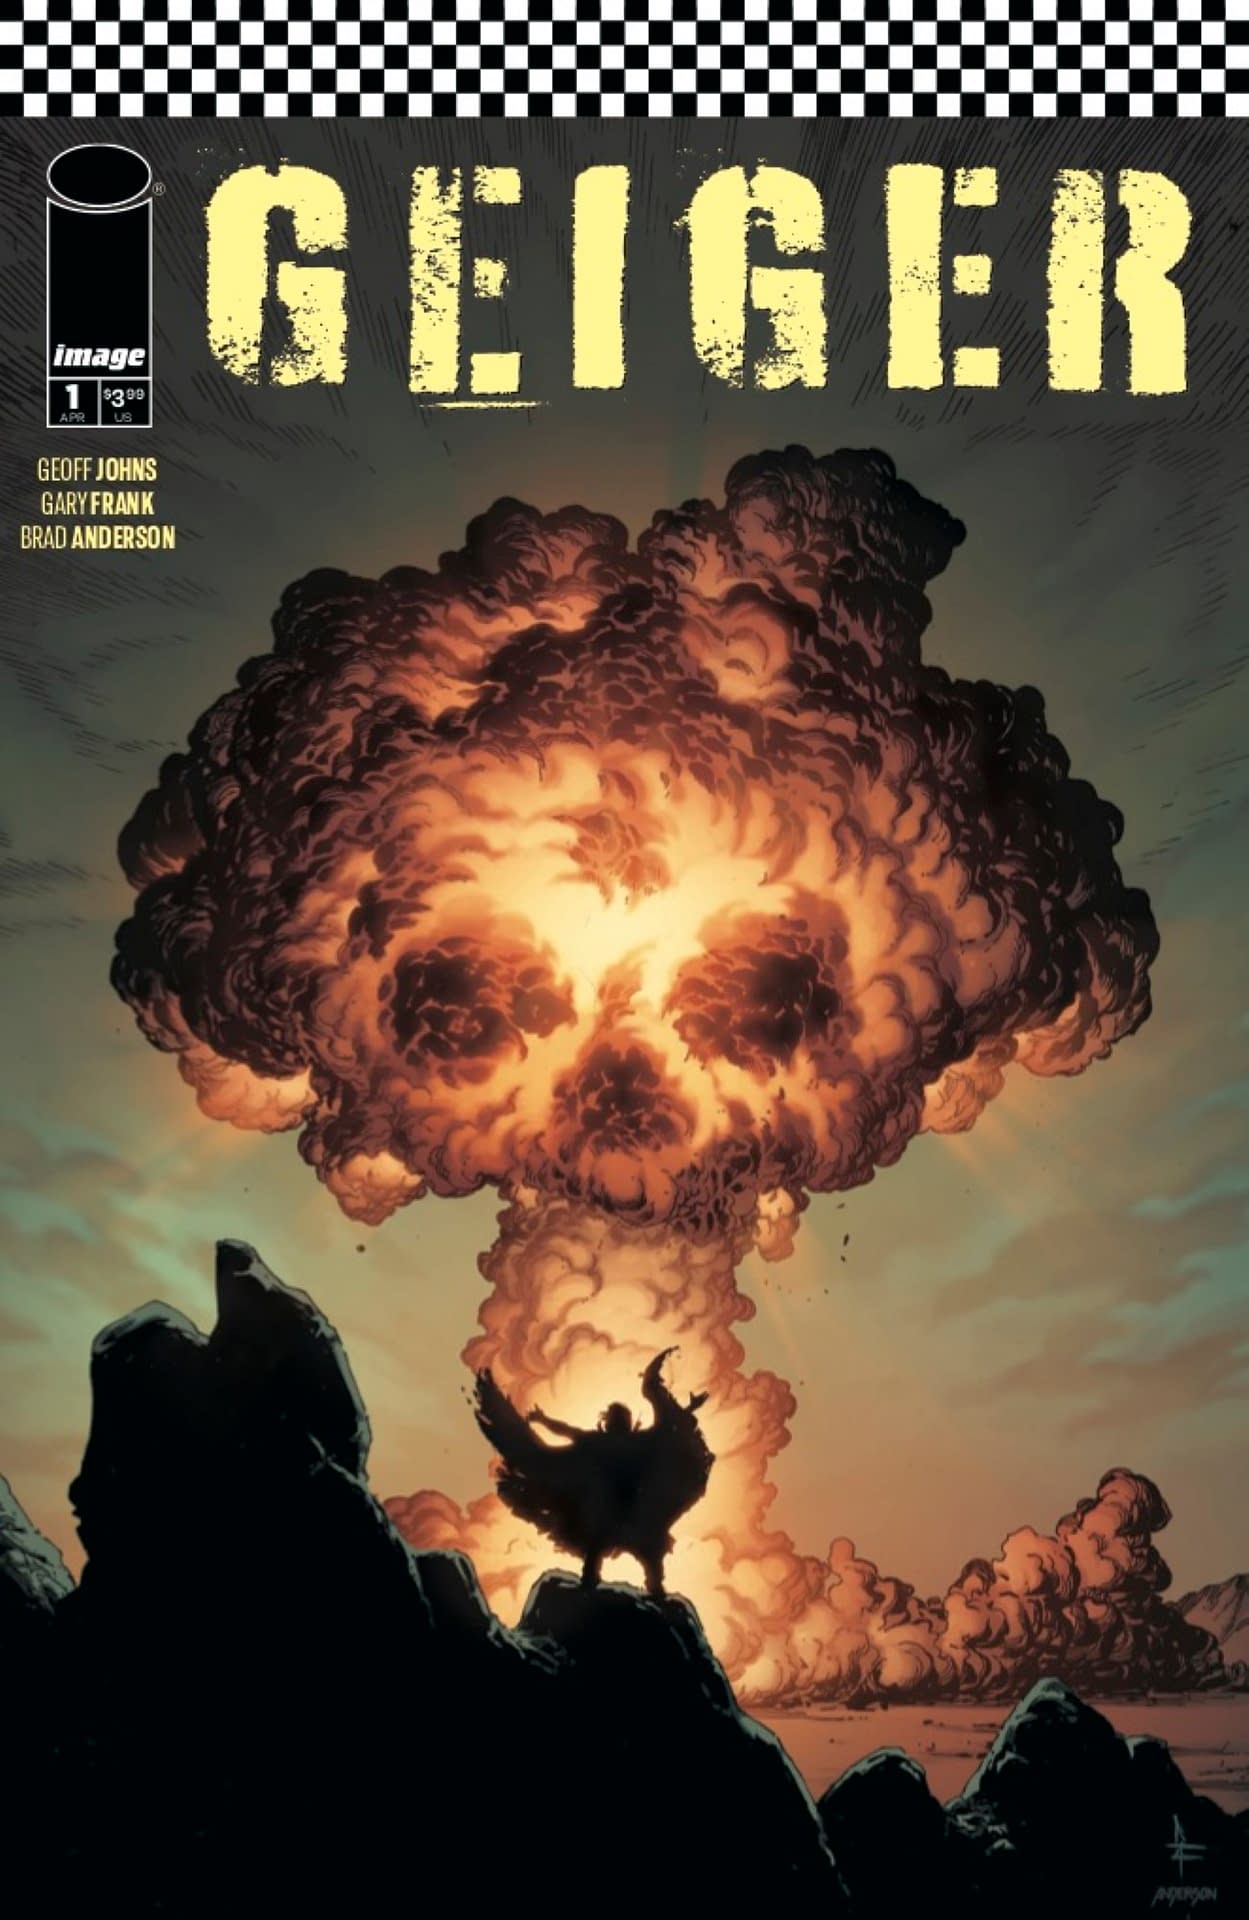 Geiger #1 cover A - featuring Geiger in front of a nuclear explosion